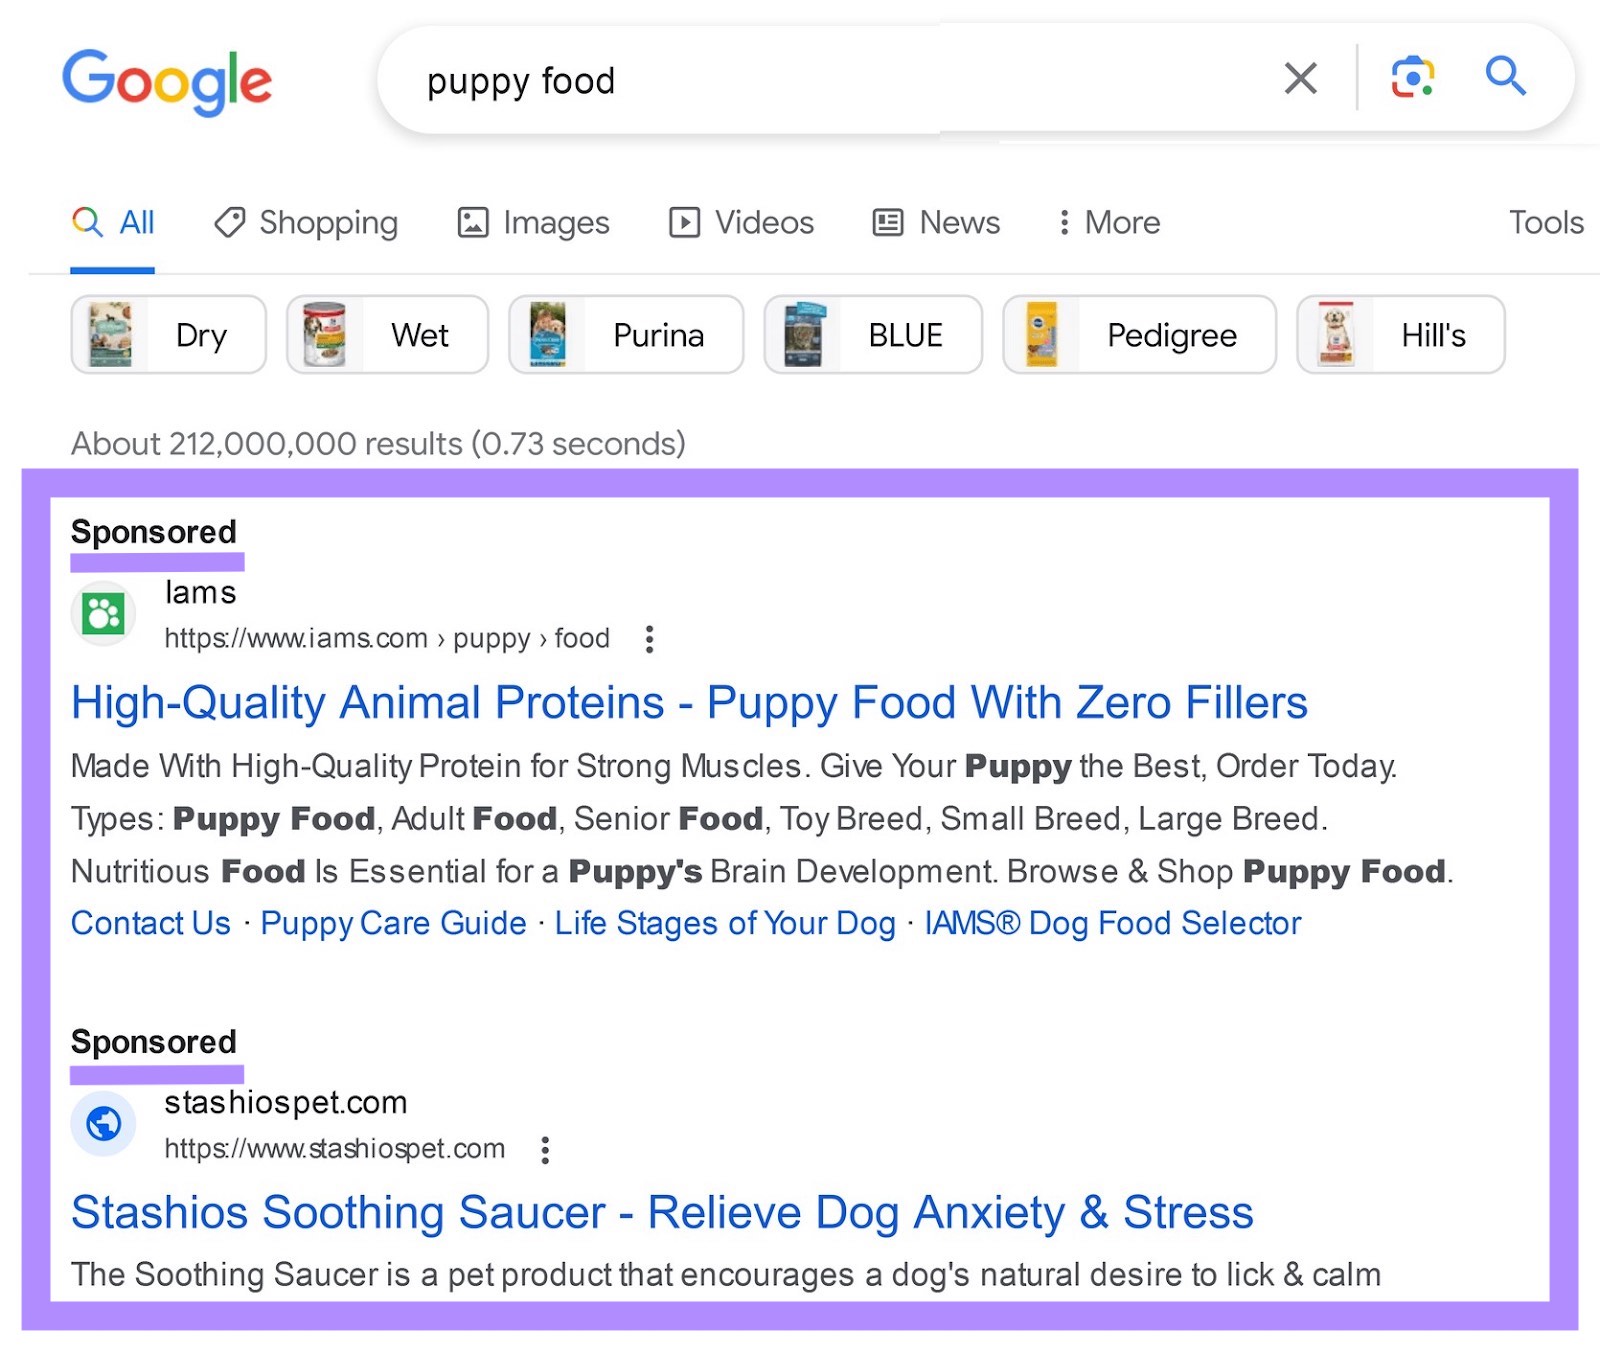 A search ad on Google SERP for "puppy food" query